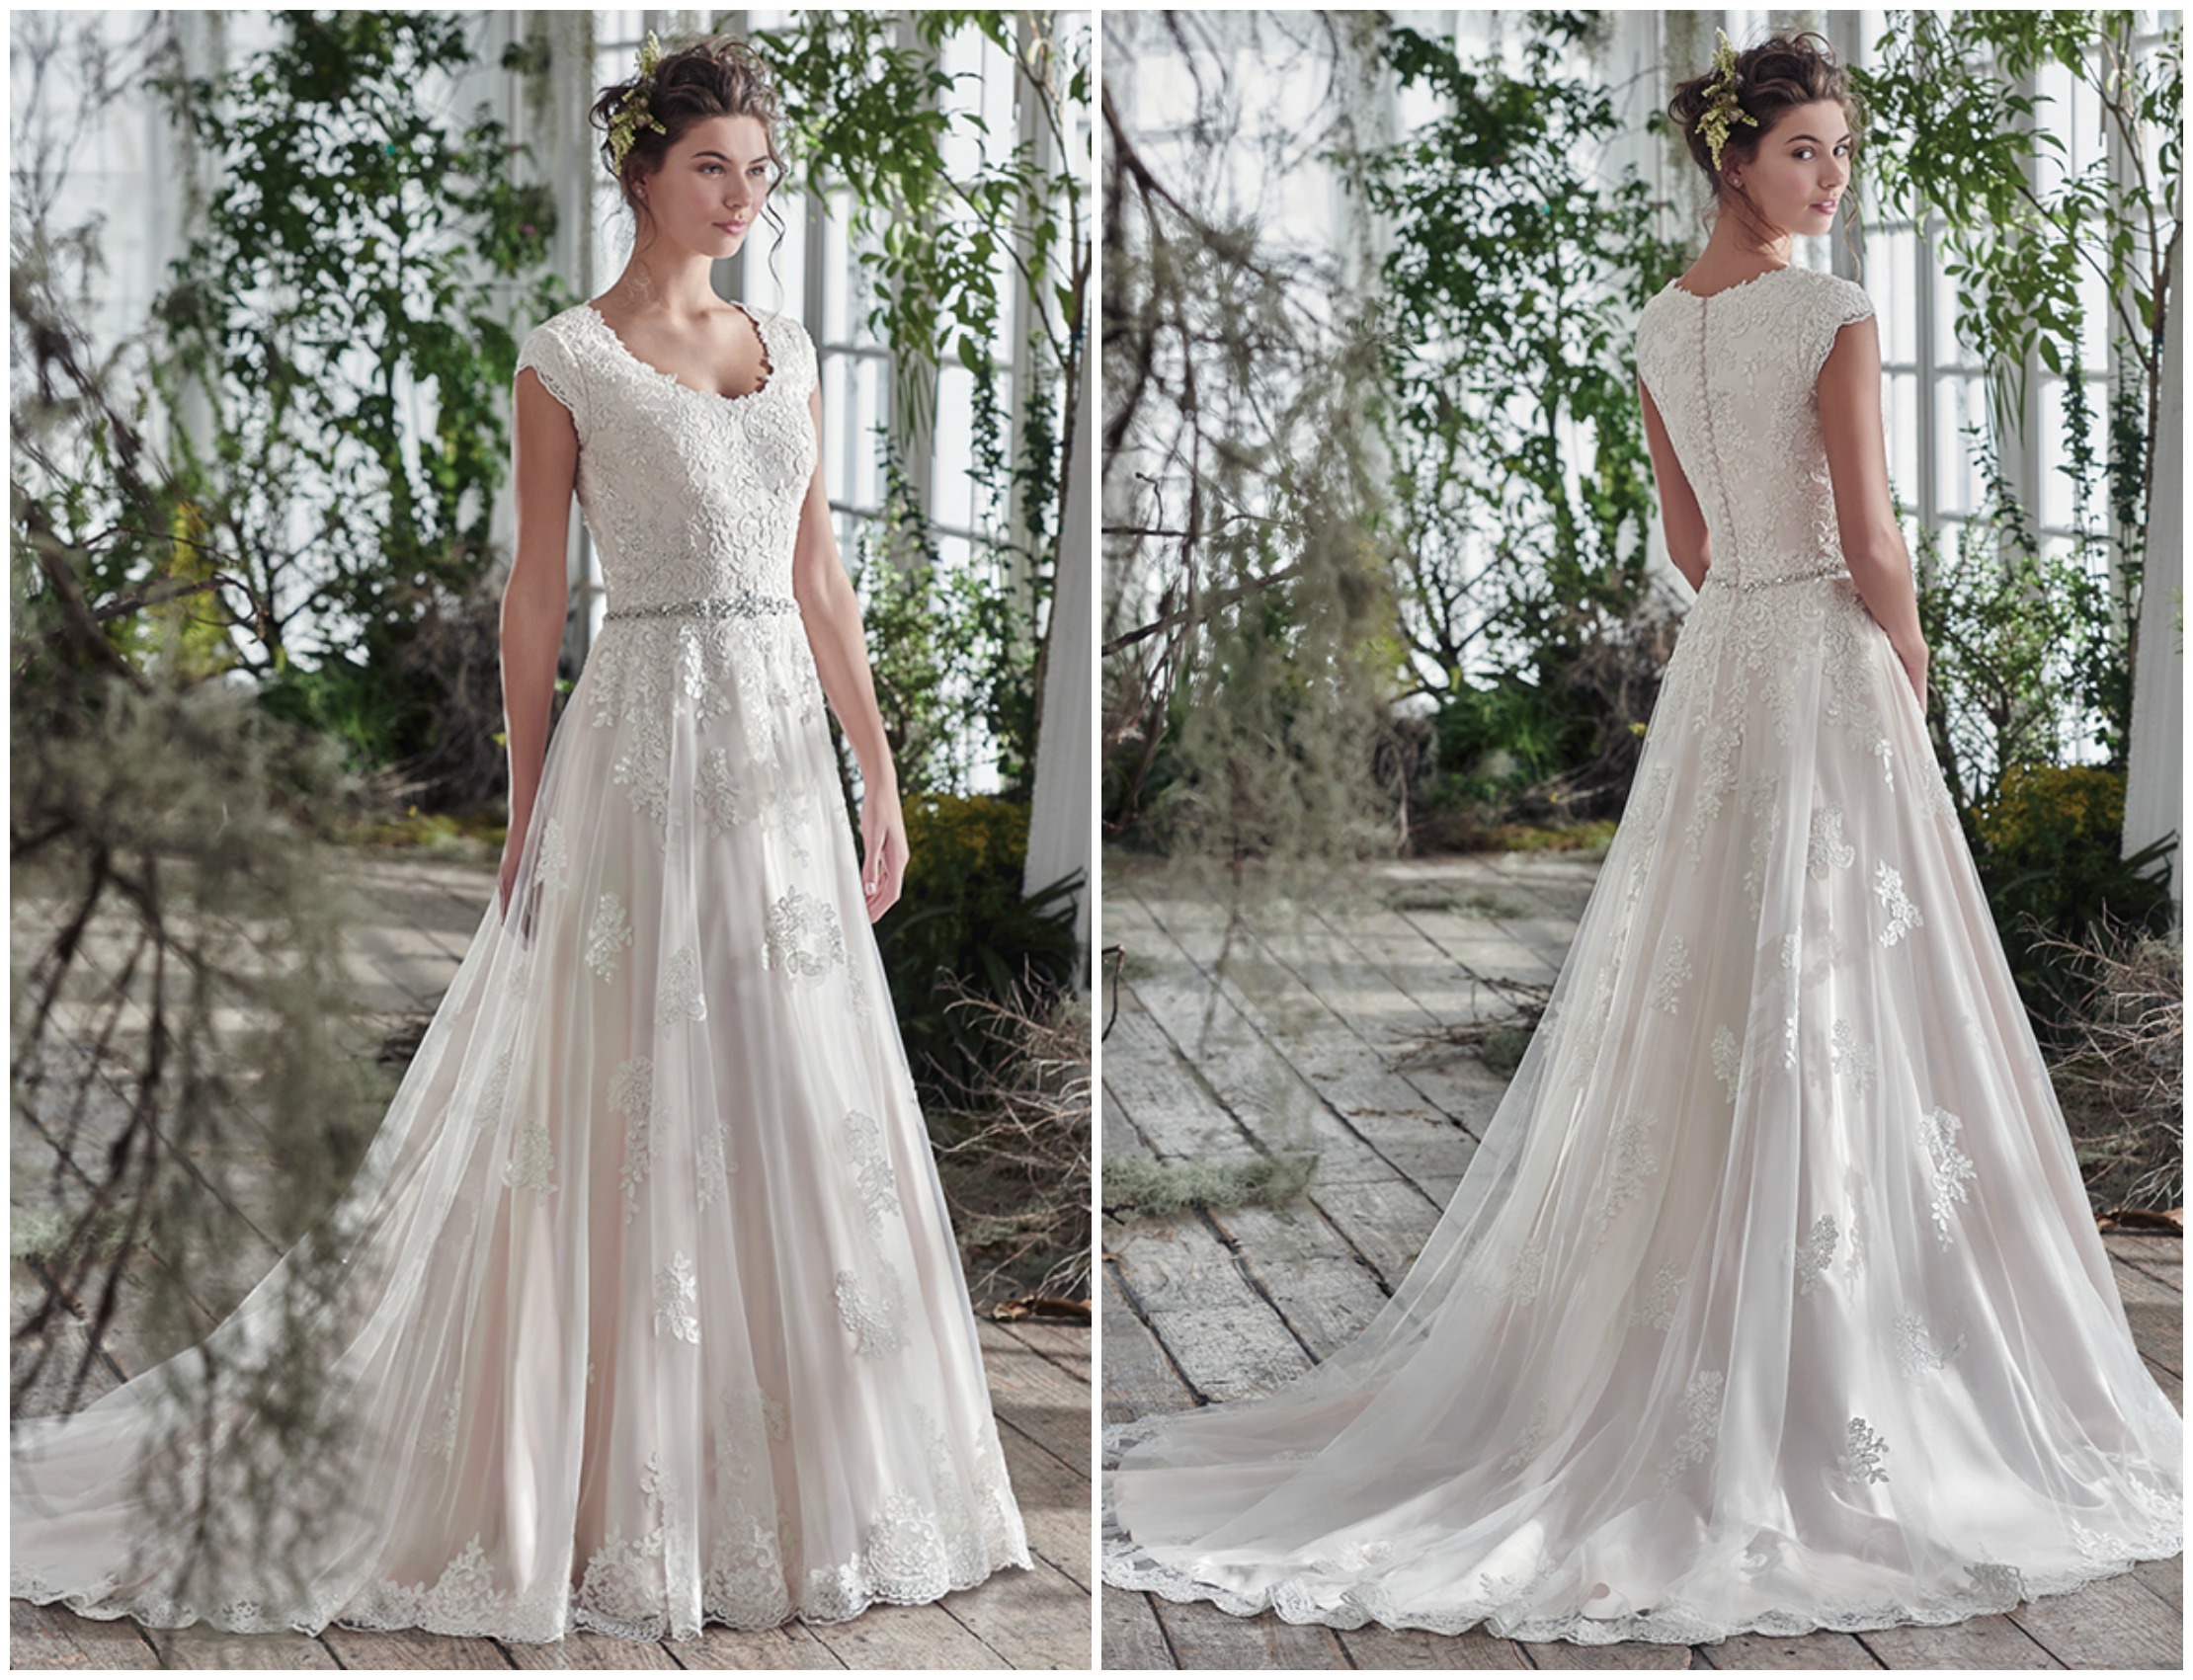 Exquisite lace details artfully cover the fitted bodice before cascading down the full A-Line skirt of this elegant tulle wedding dress. Complete with a soft scoop neckline, lined lace cap-sleeves, and an exquisitely beaded belt. Finished with covered buttons over zipper and inner elastic closure.

<a href="https://www.maggiesottero.com/maggie-sottero/shannon/9769" target="_blank">Maggie Sottero</a>